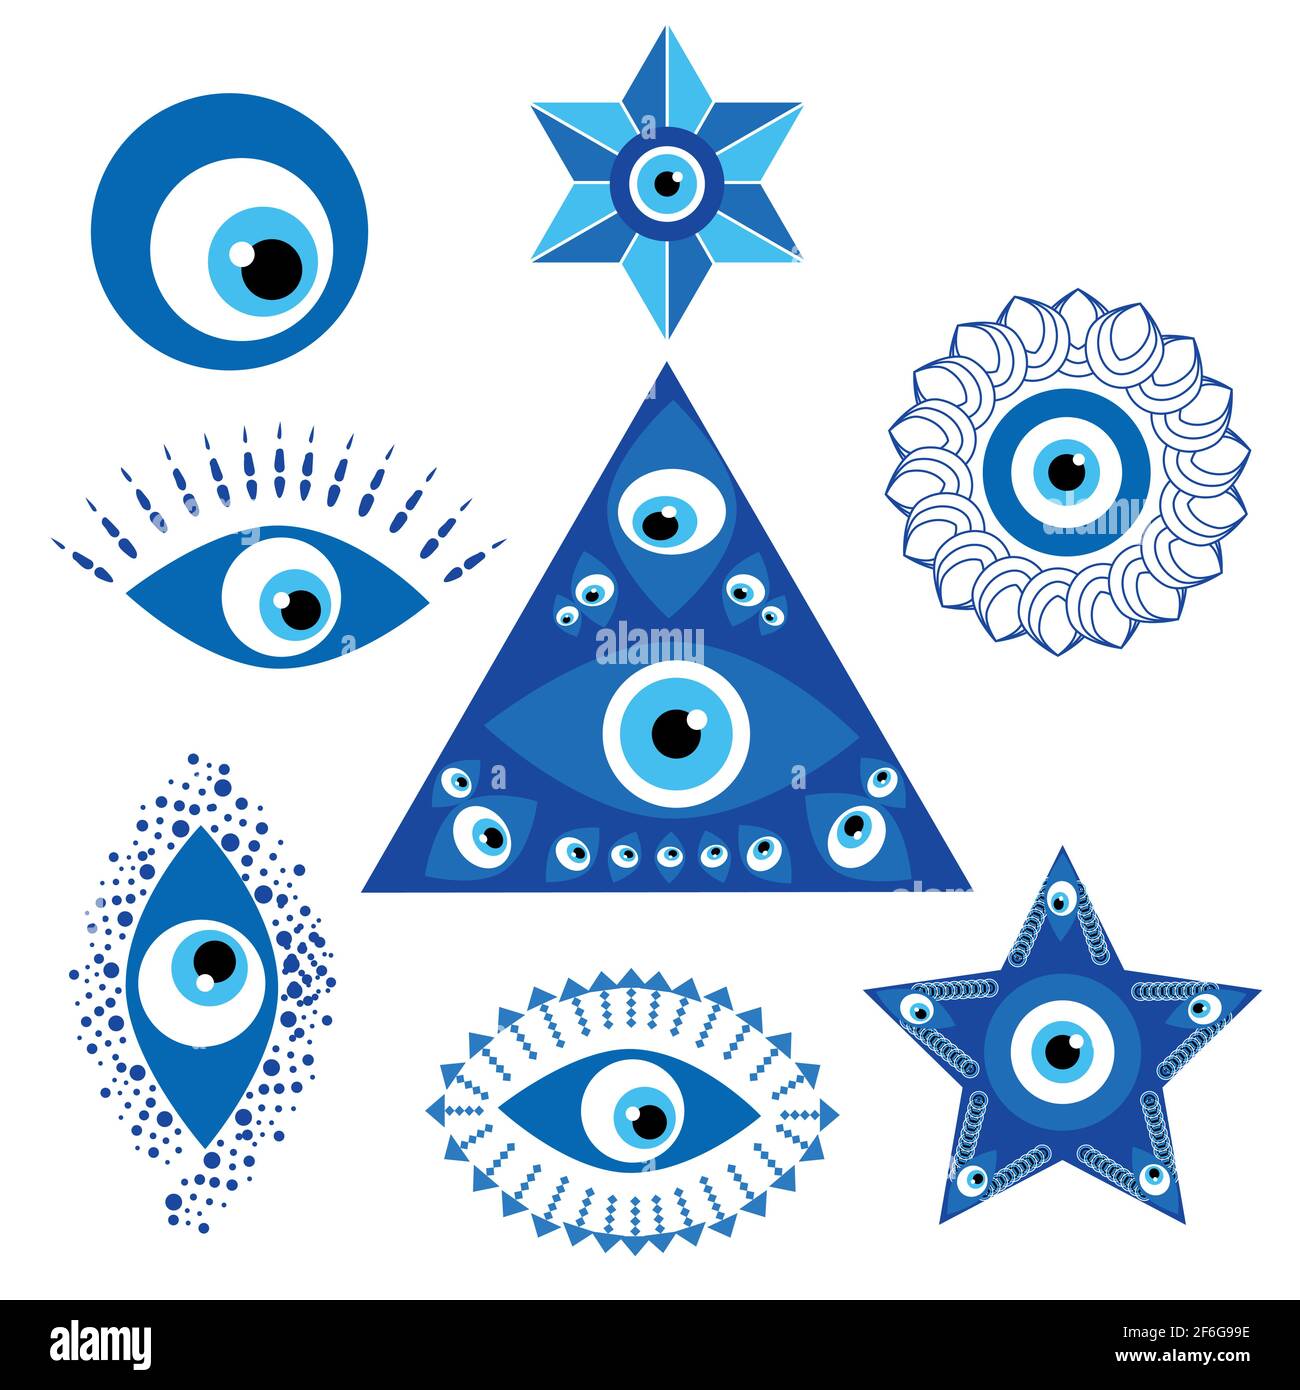 Evil Eye by ONYXprj | GraphicRiver